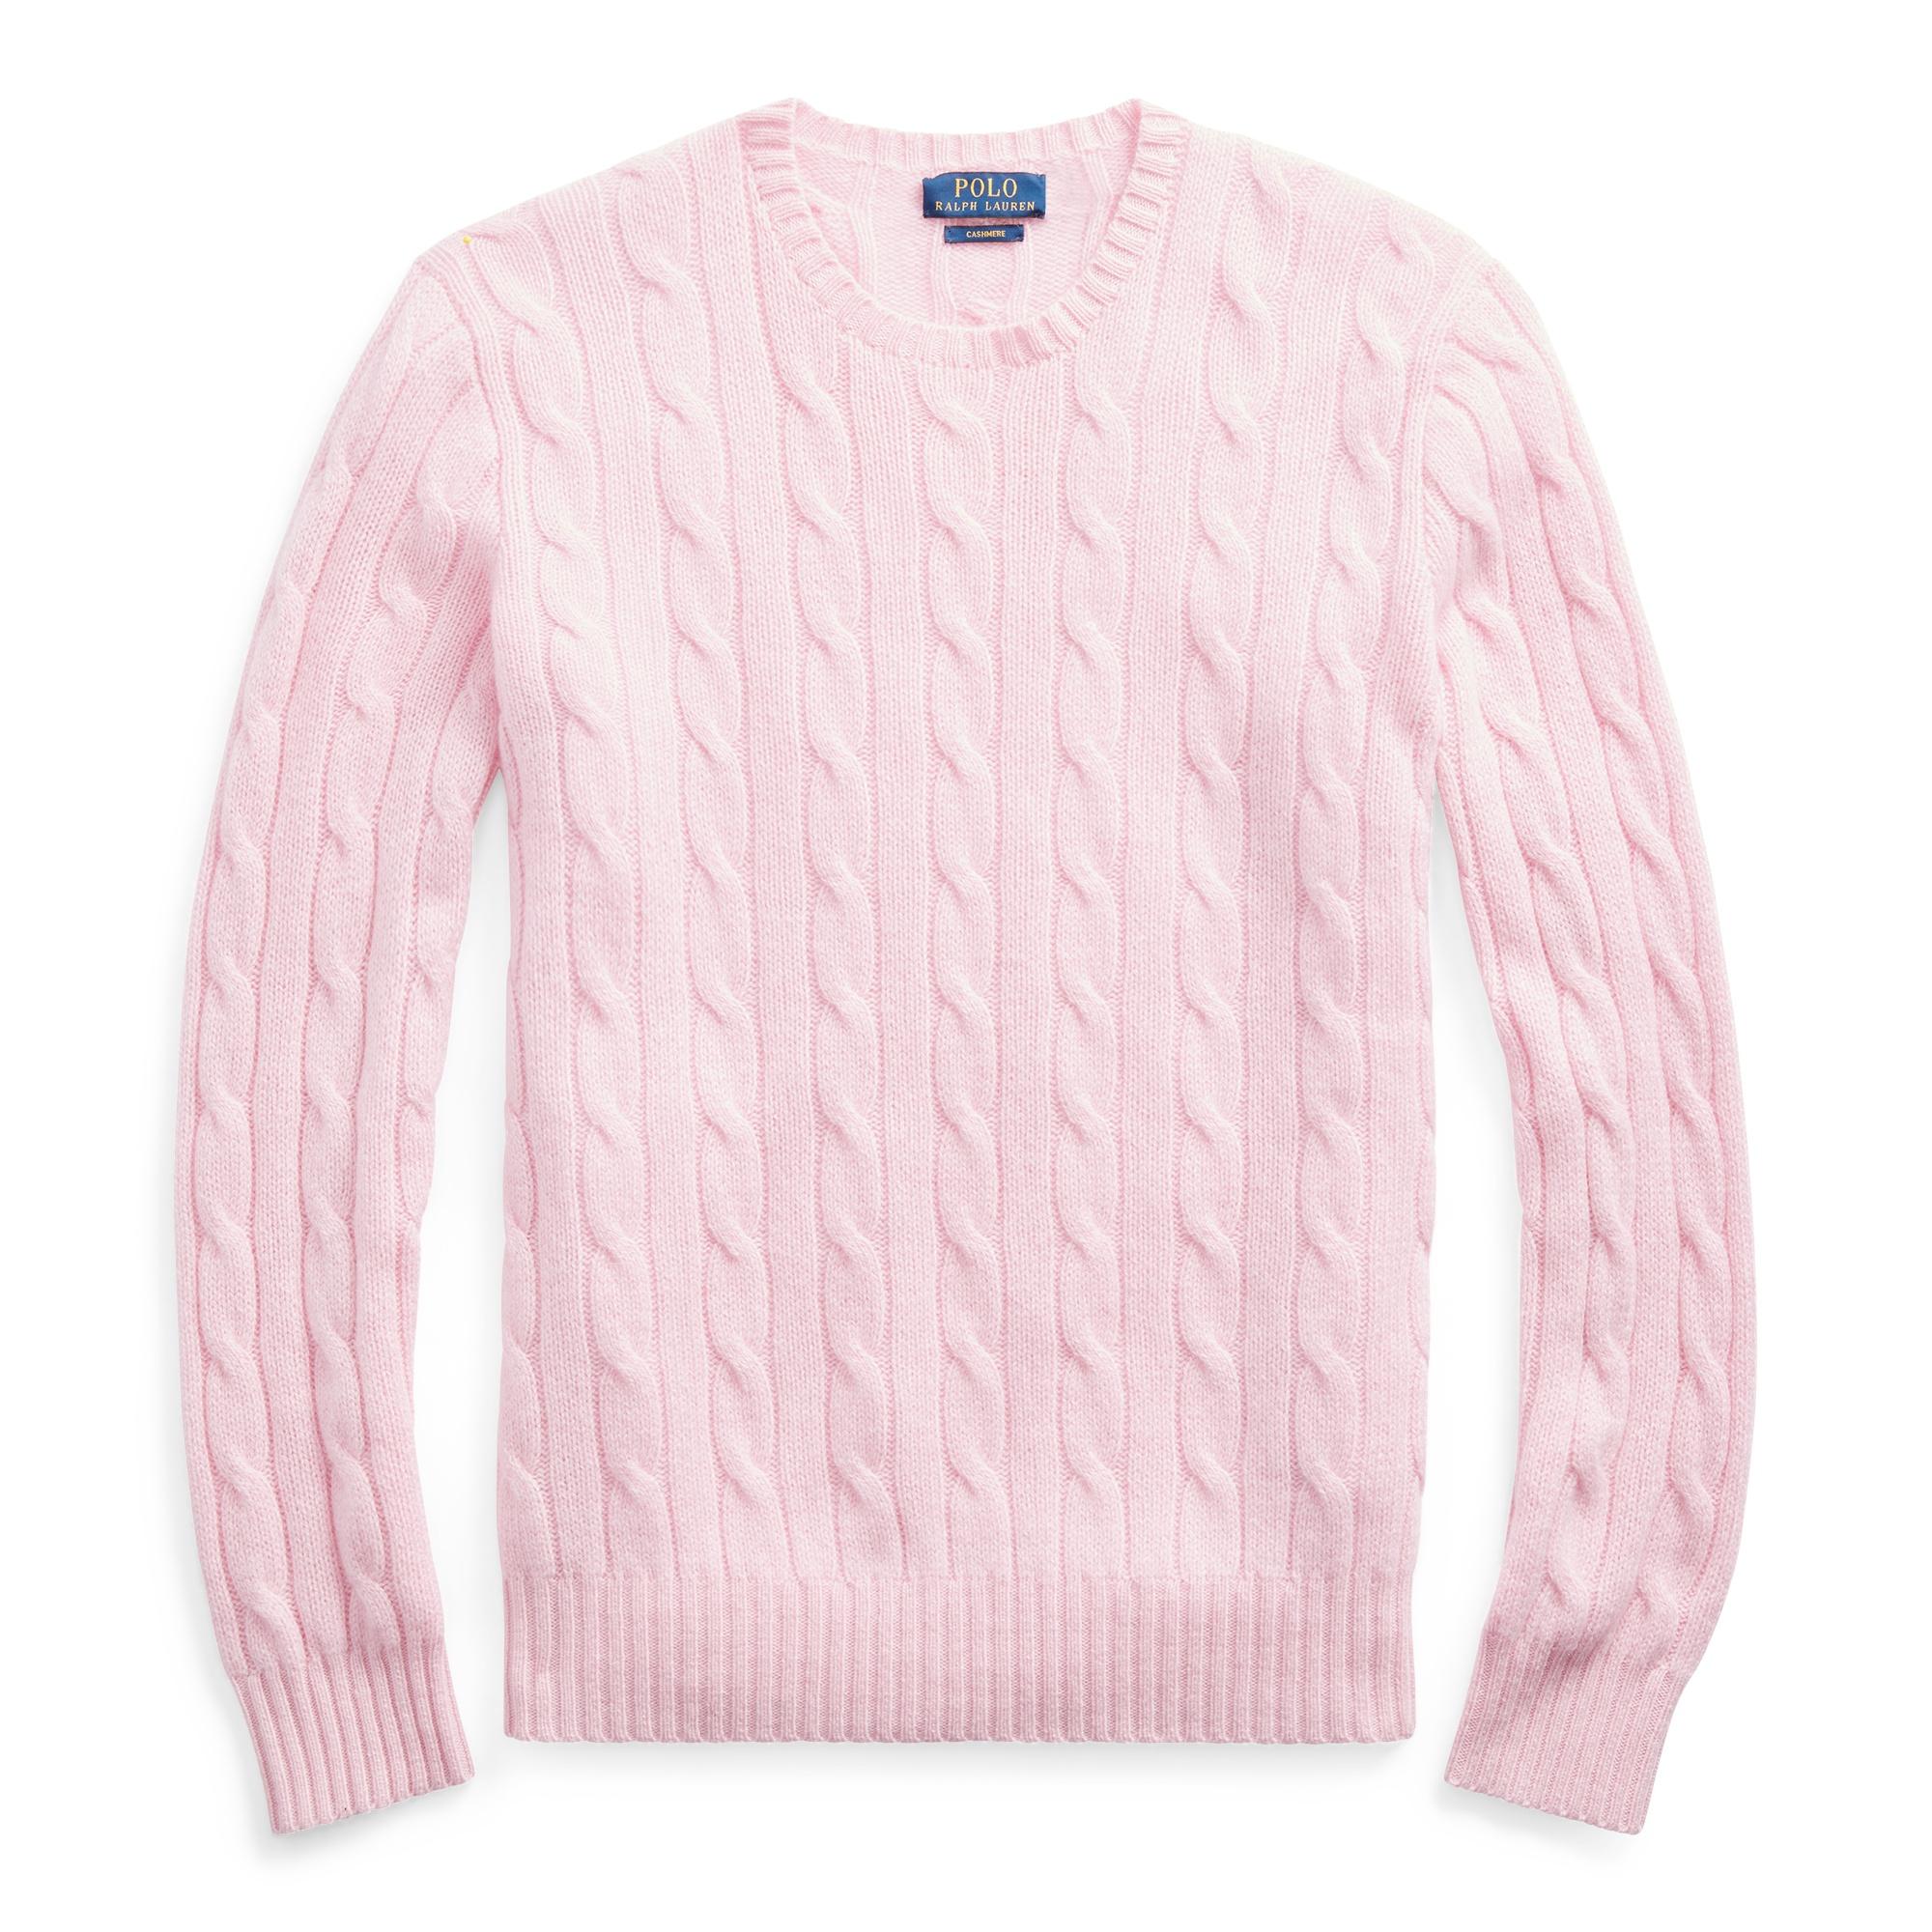 Polo Ralph Lauren Cable-knit Cashmere Sweater in Pink for Men - Lyst